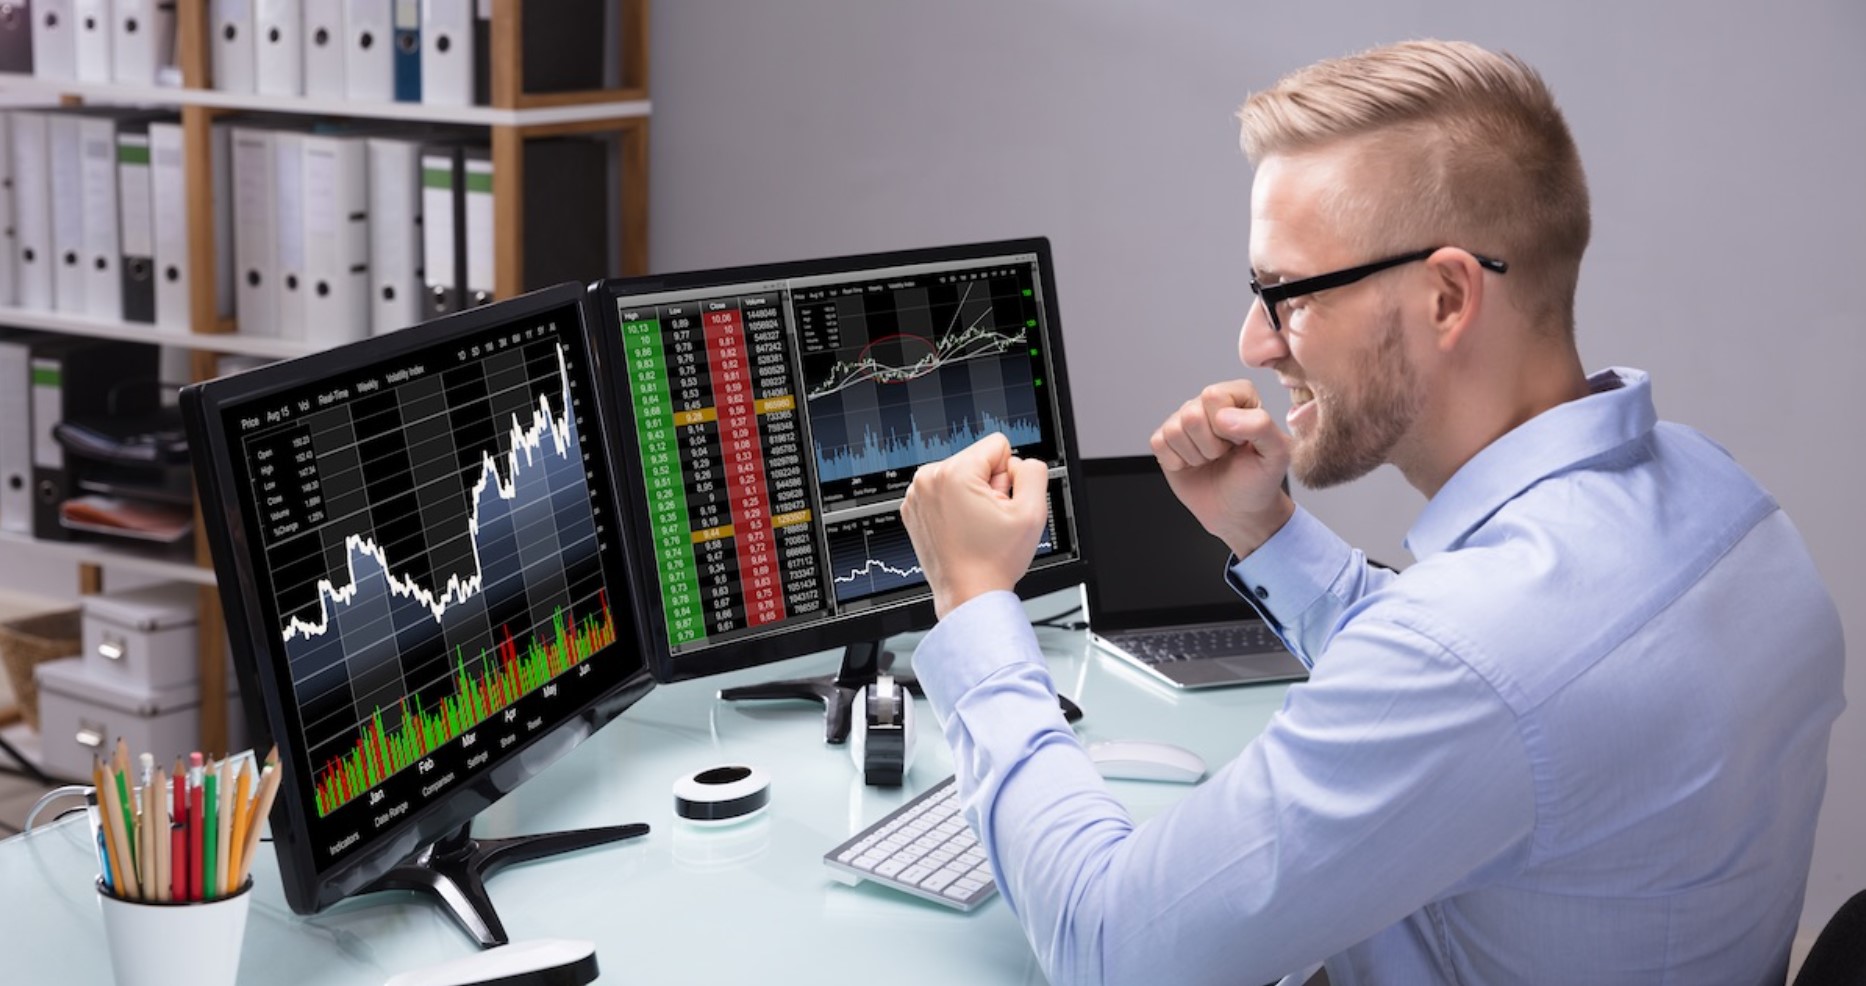 Social Trading Platforms: Learning from Successful Traders